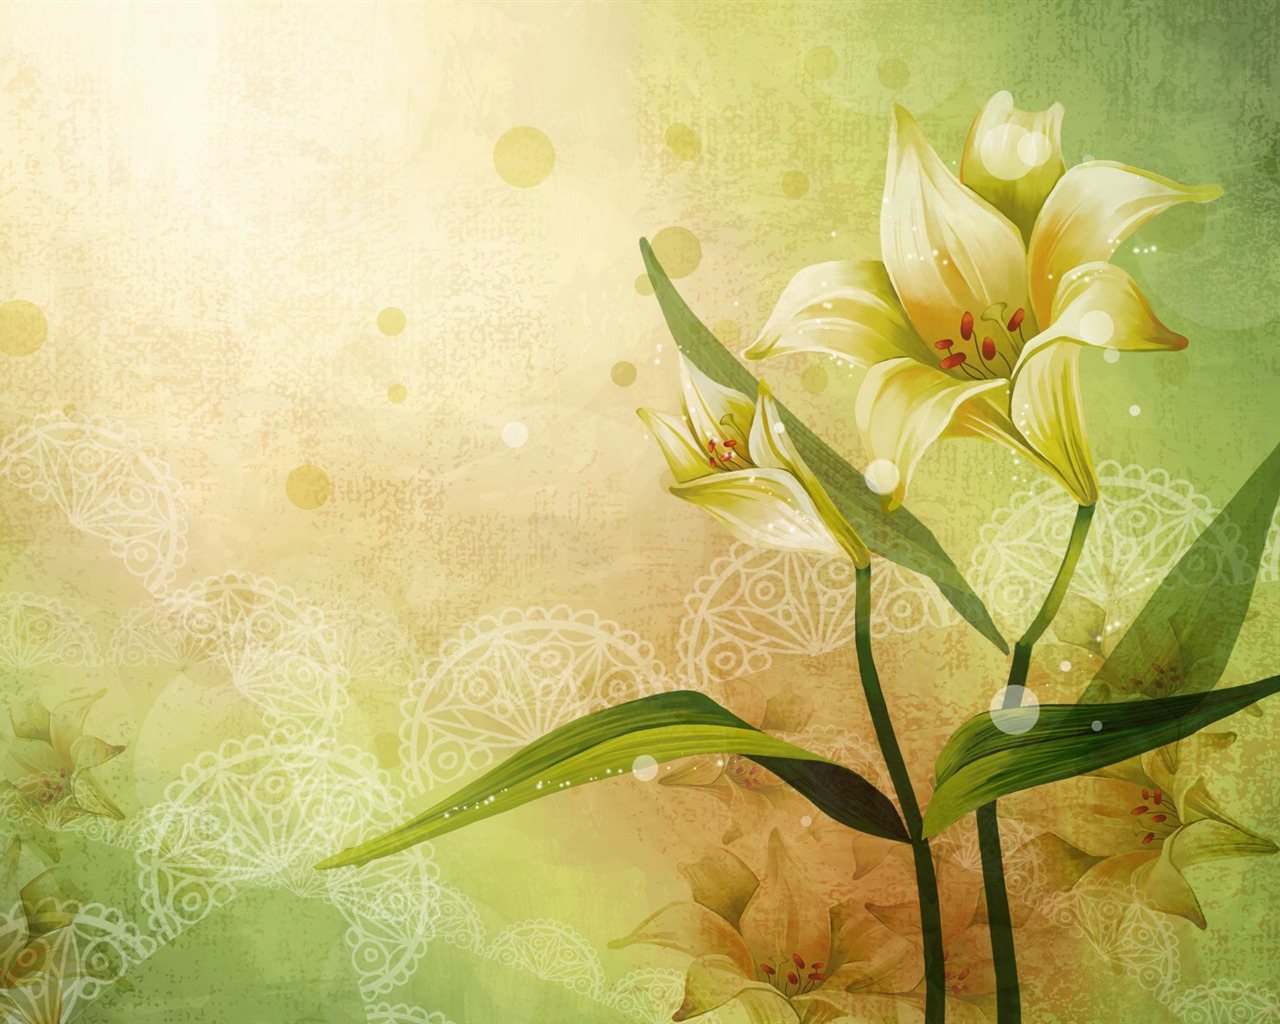 Synthetic Wallpaper Colorful Flower #26 - 1280x1024